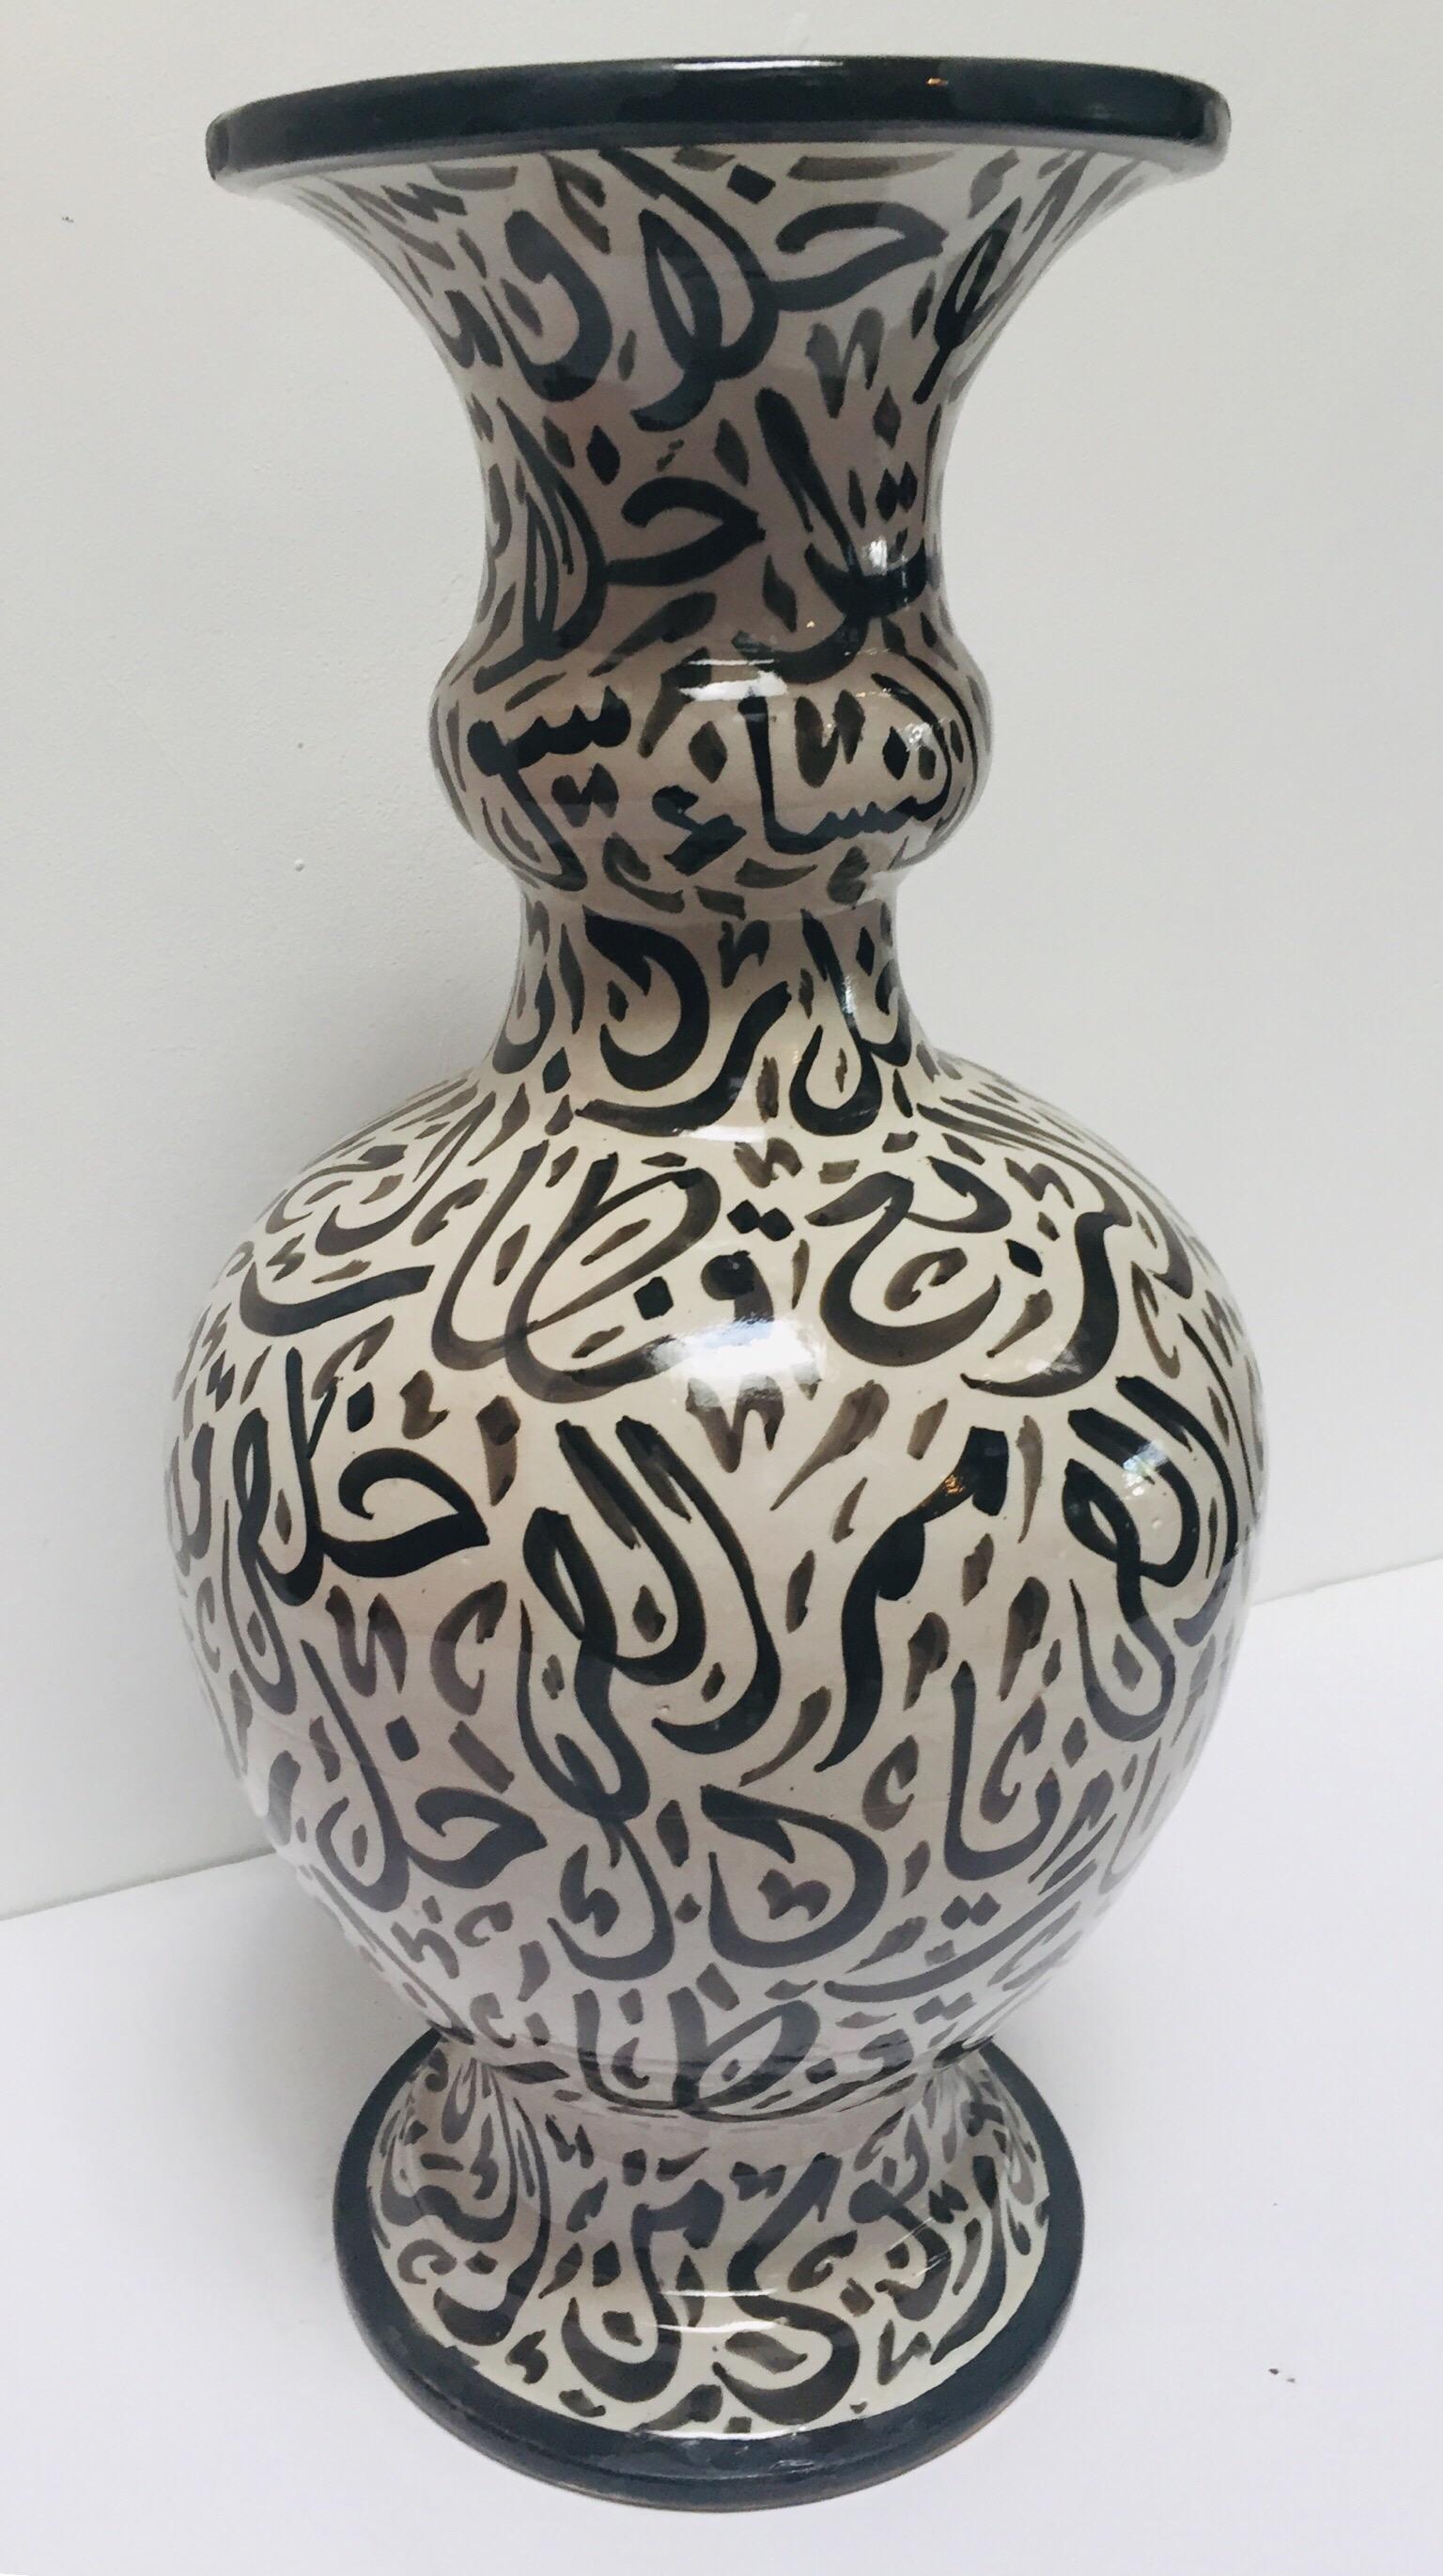 Large Moroccan Glazed Ceramic Vase with Arabic Calligraphy Brown Writing, Fez 5